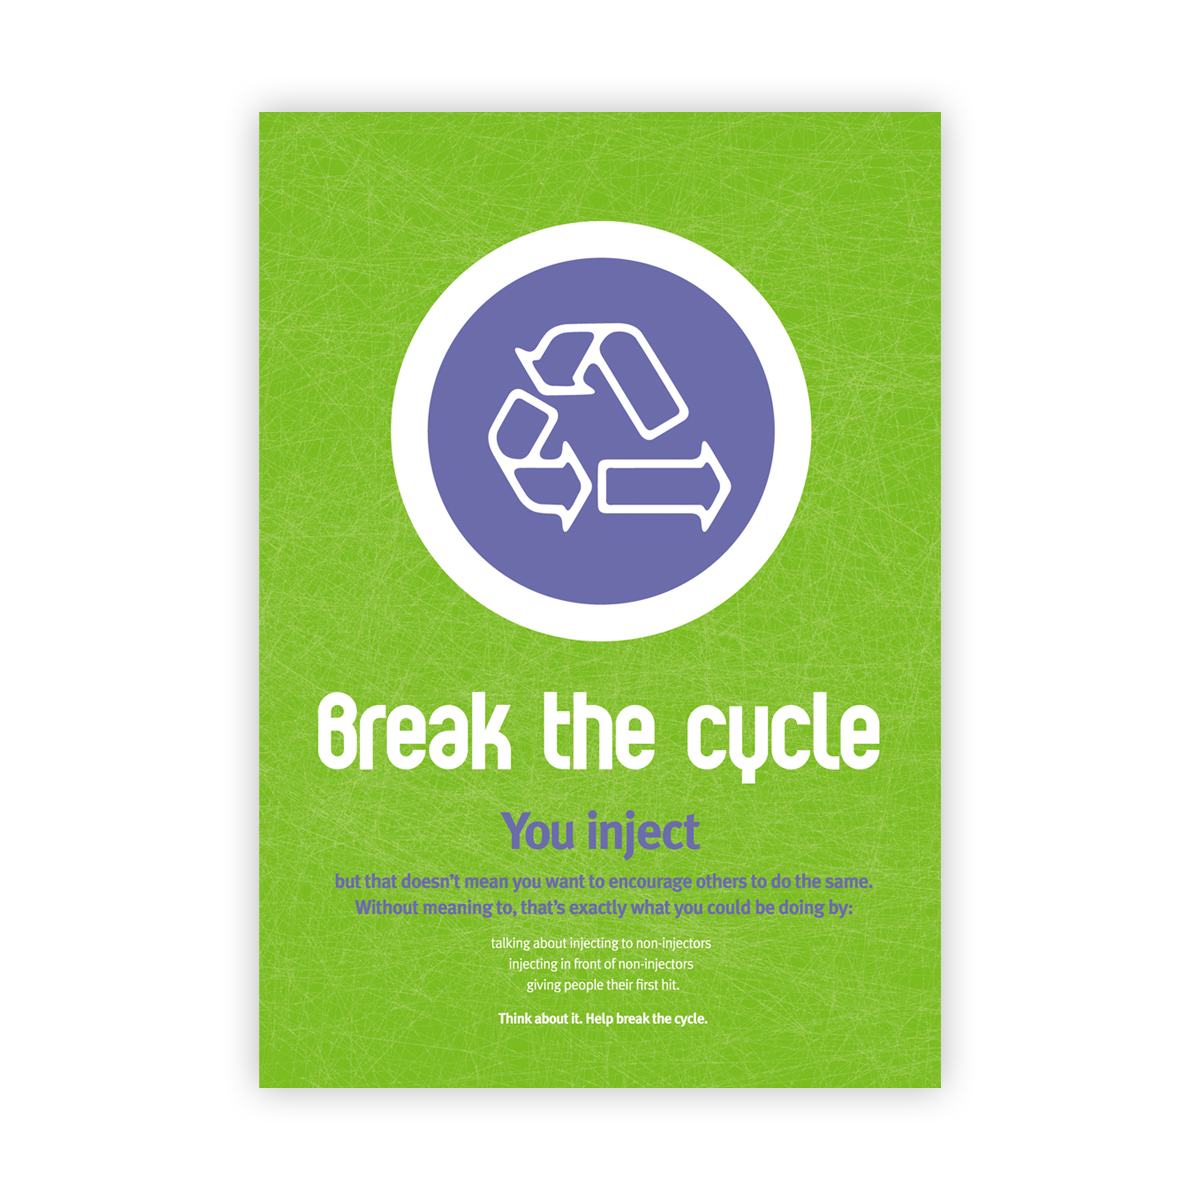 Break the cycle campaign: poster (large) - no longer stocked